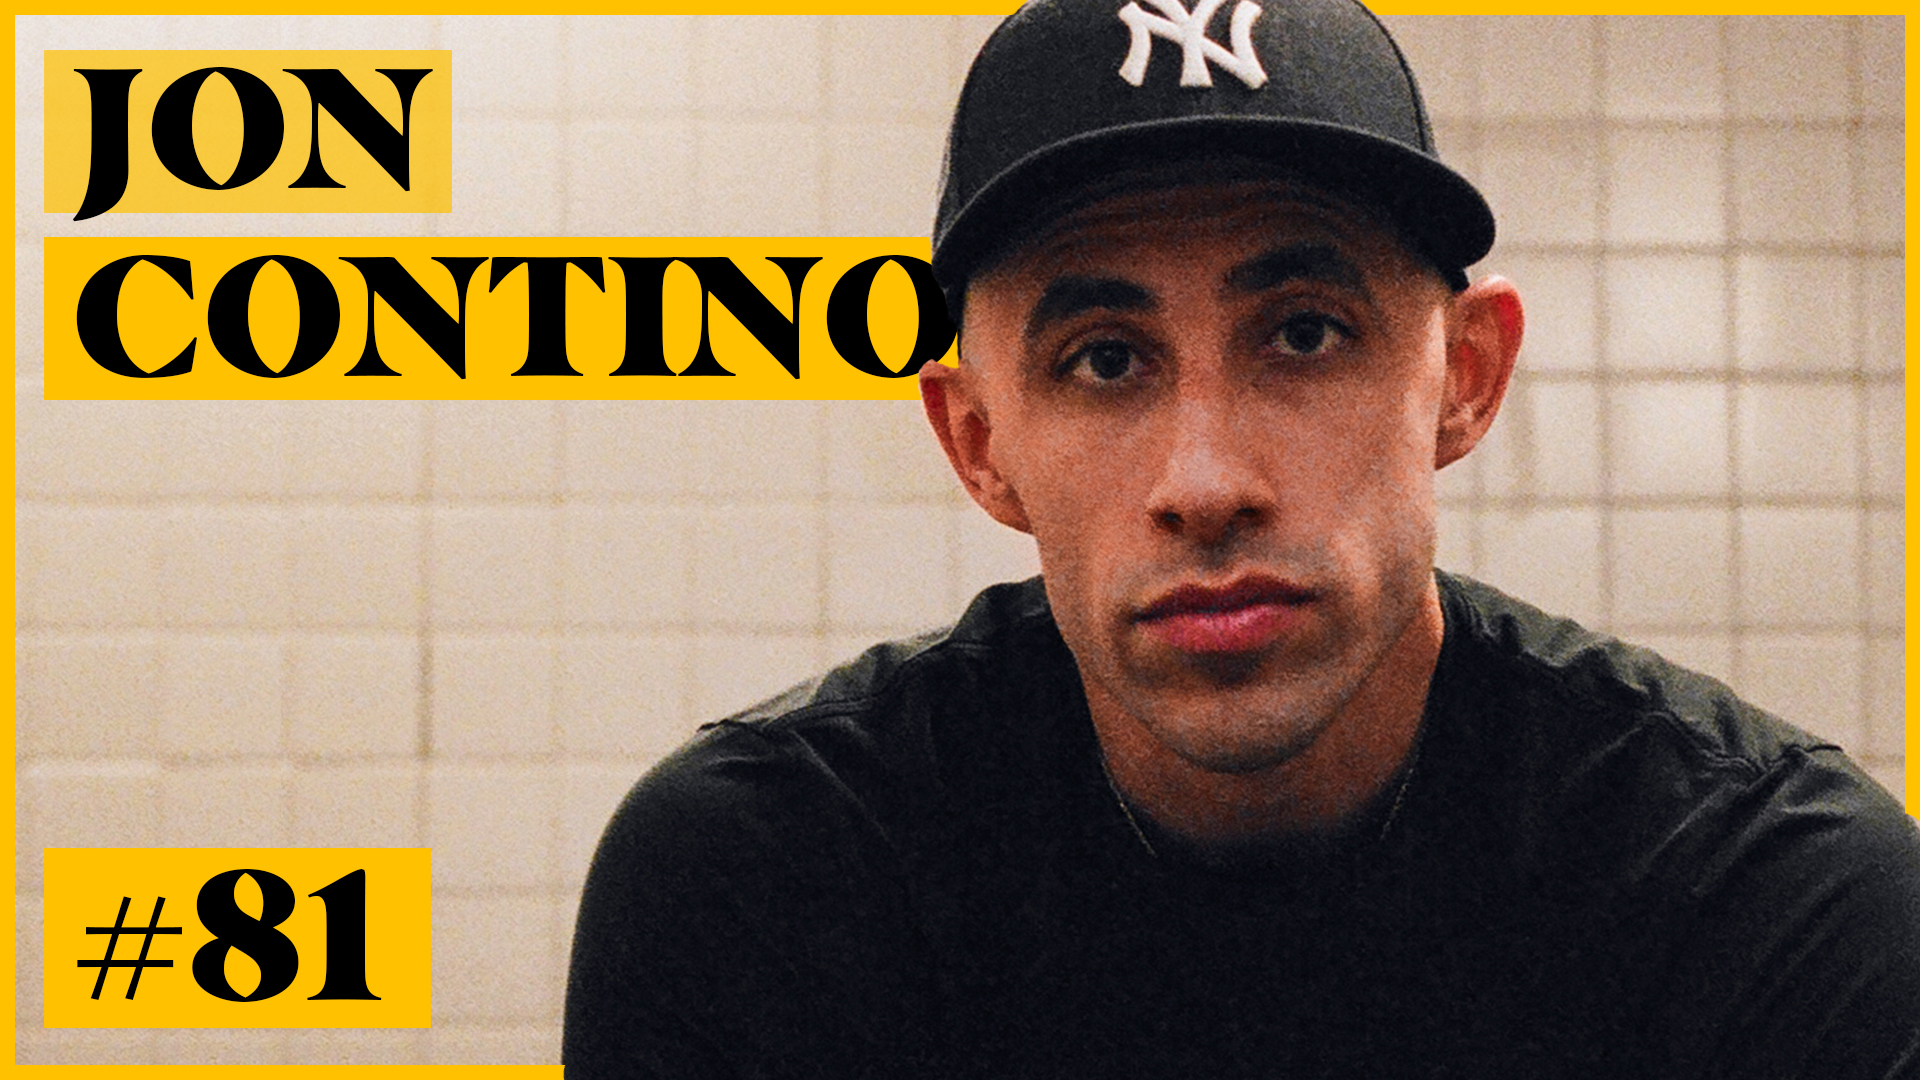 81. Jon Contino – Finding Peace In Creative Work, You Need A Hobby, Navigating the Peaks And Valleys, Being True To Yourself & The Uglybooks